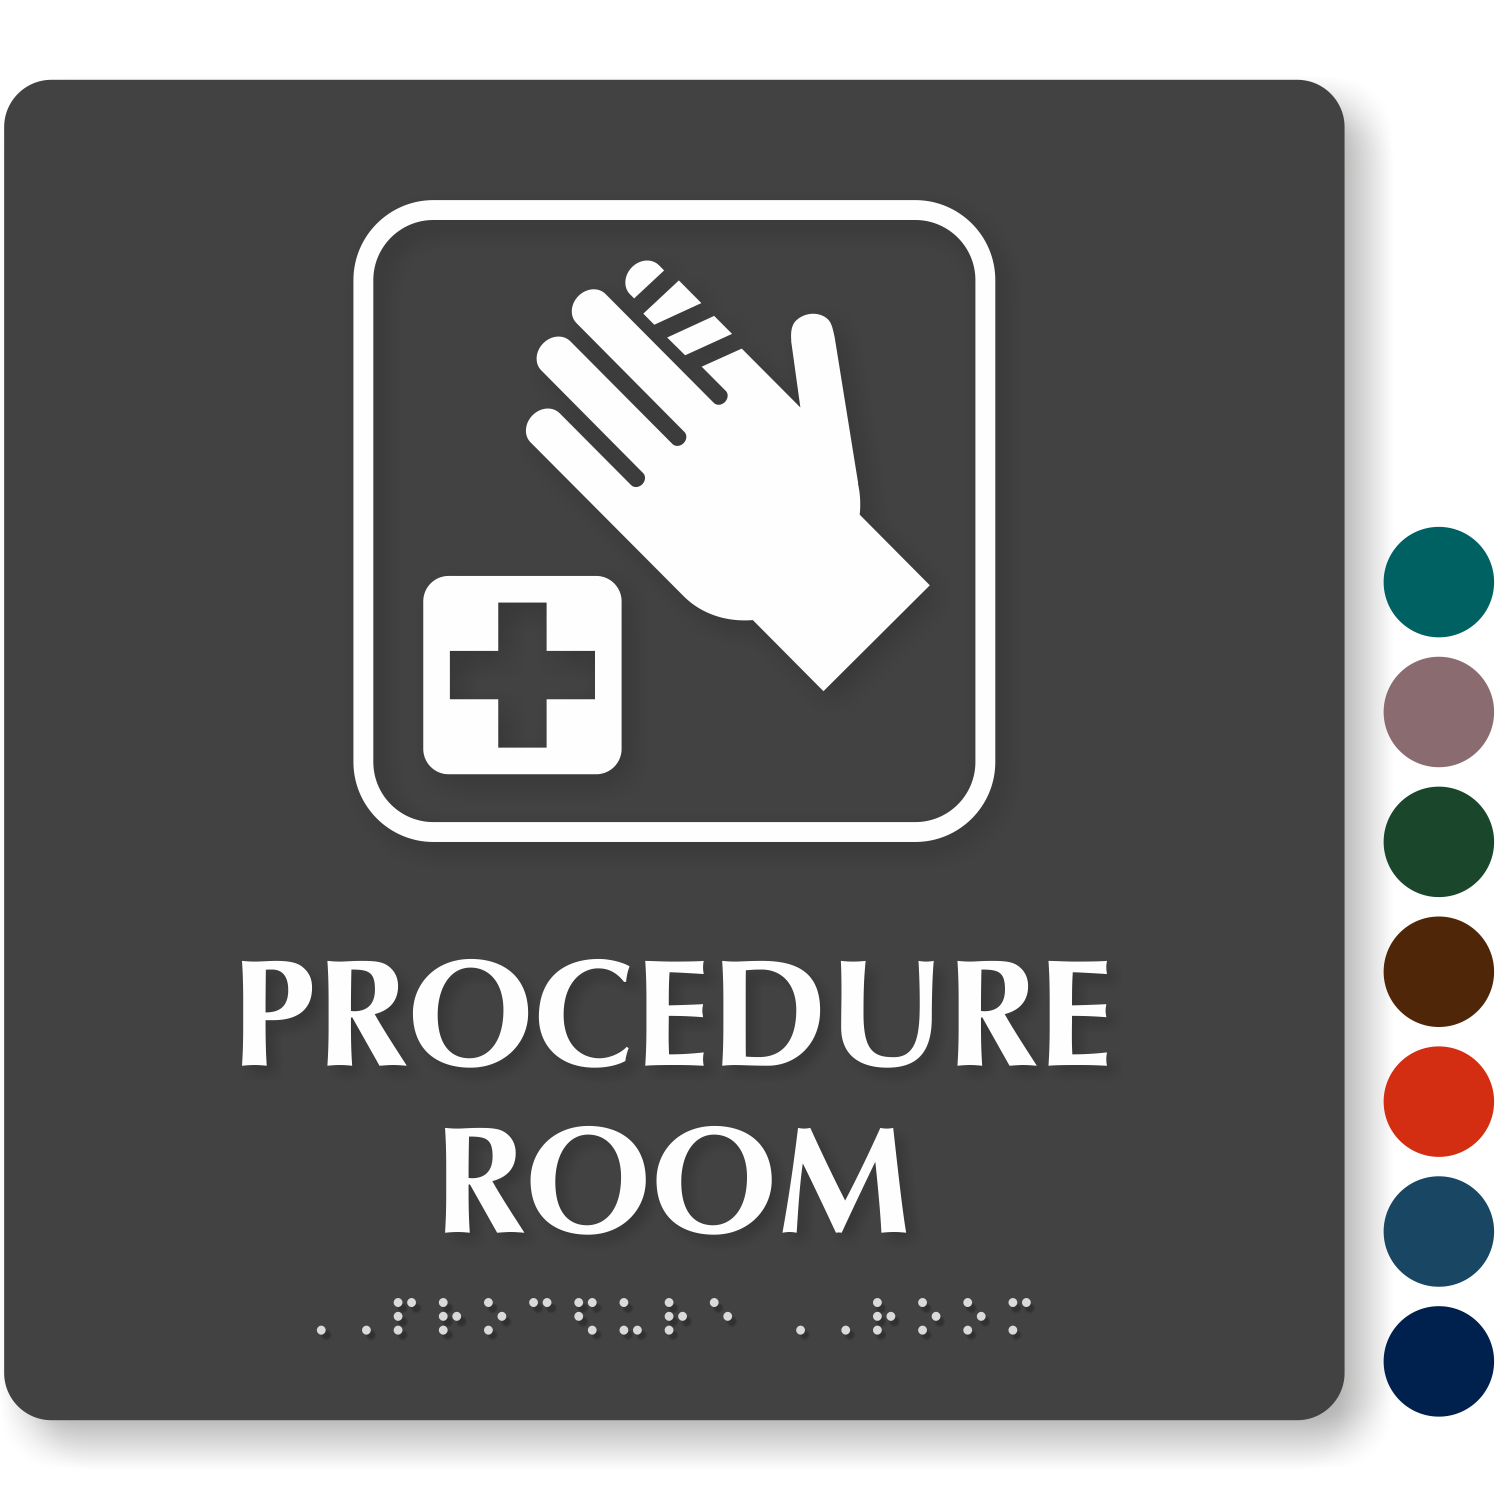 Medical Office Signs & Doctor's Office Signs